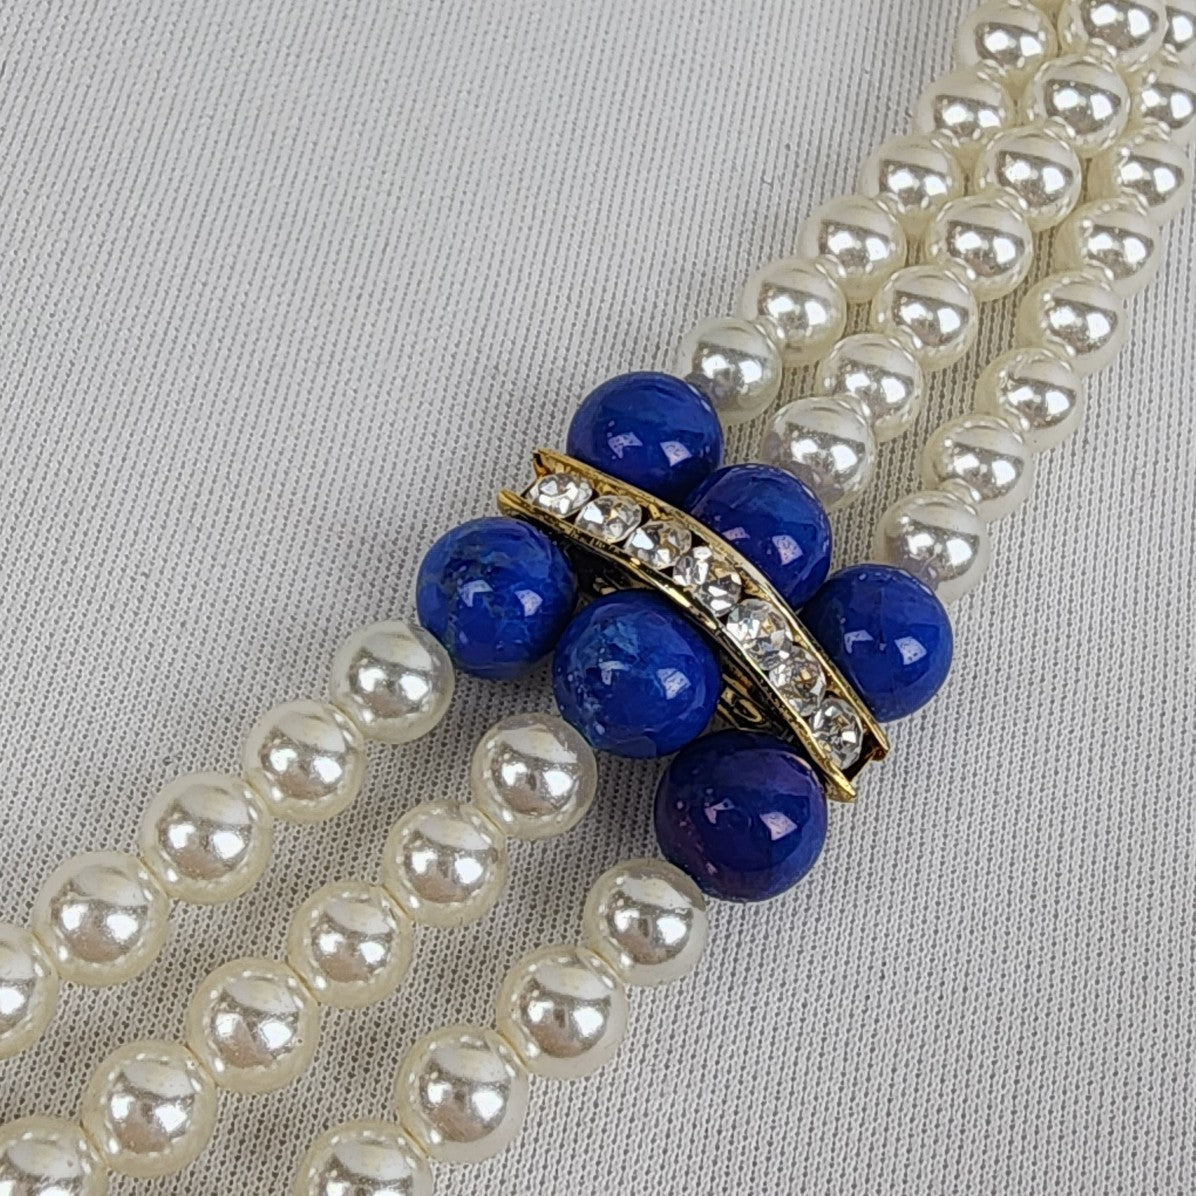 Vintage Blue Natural Stone Faux Pearl Layered Collar Necklace